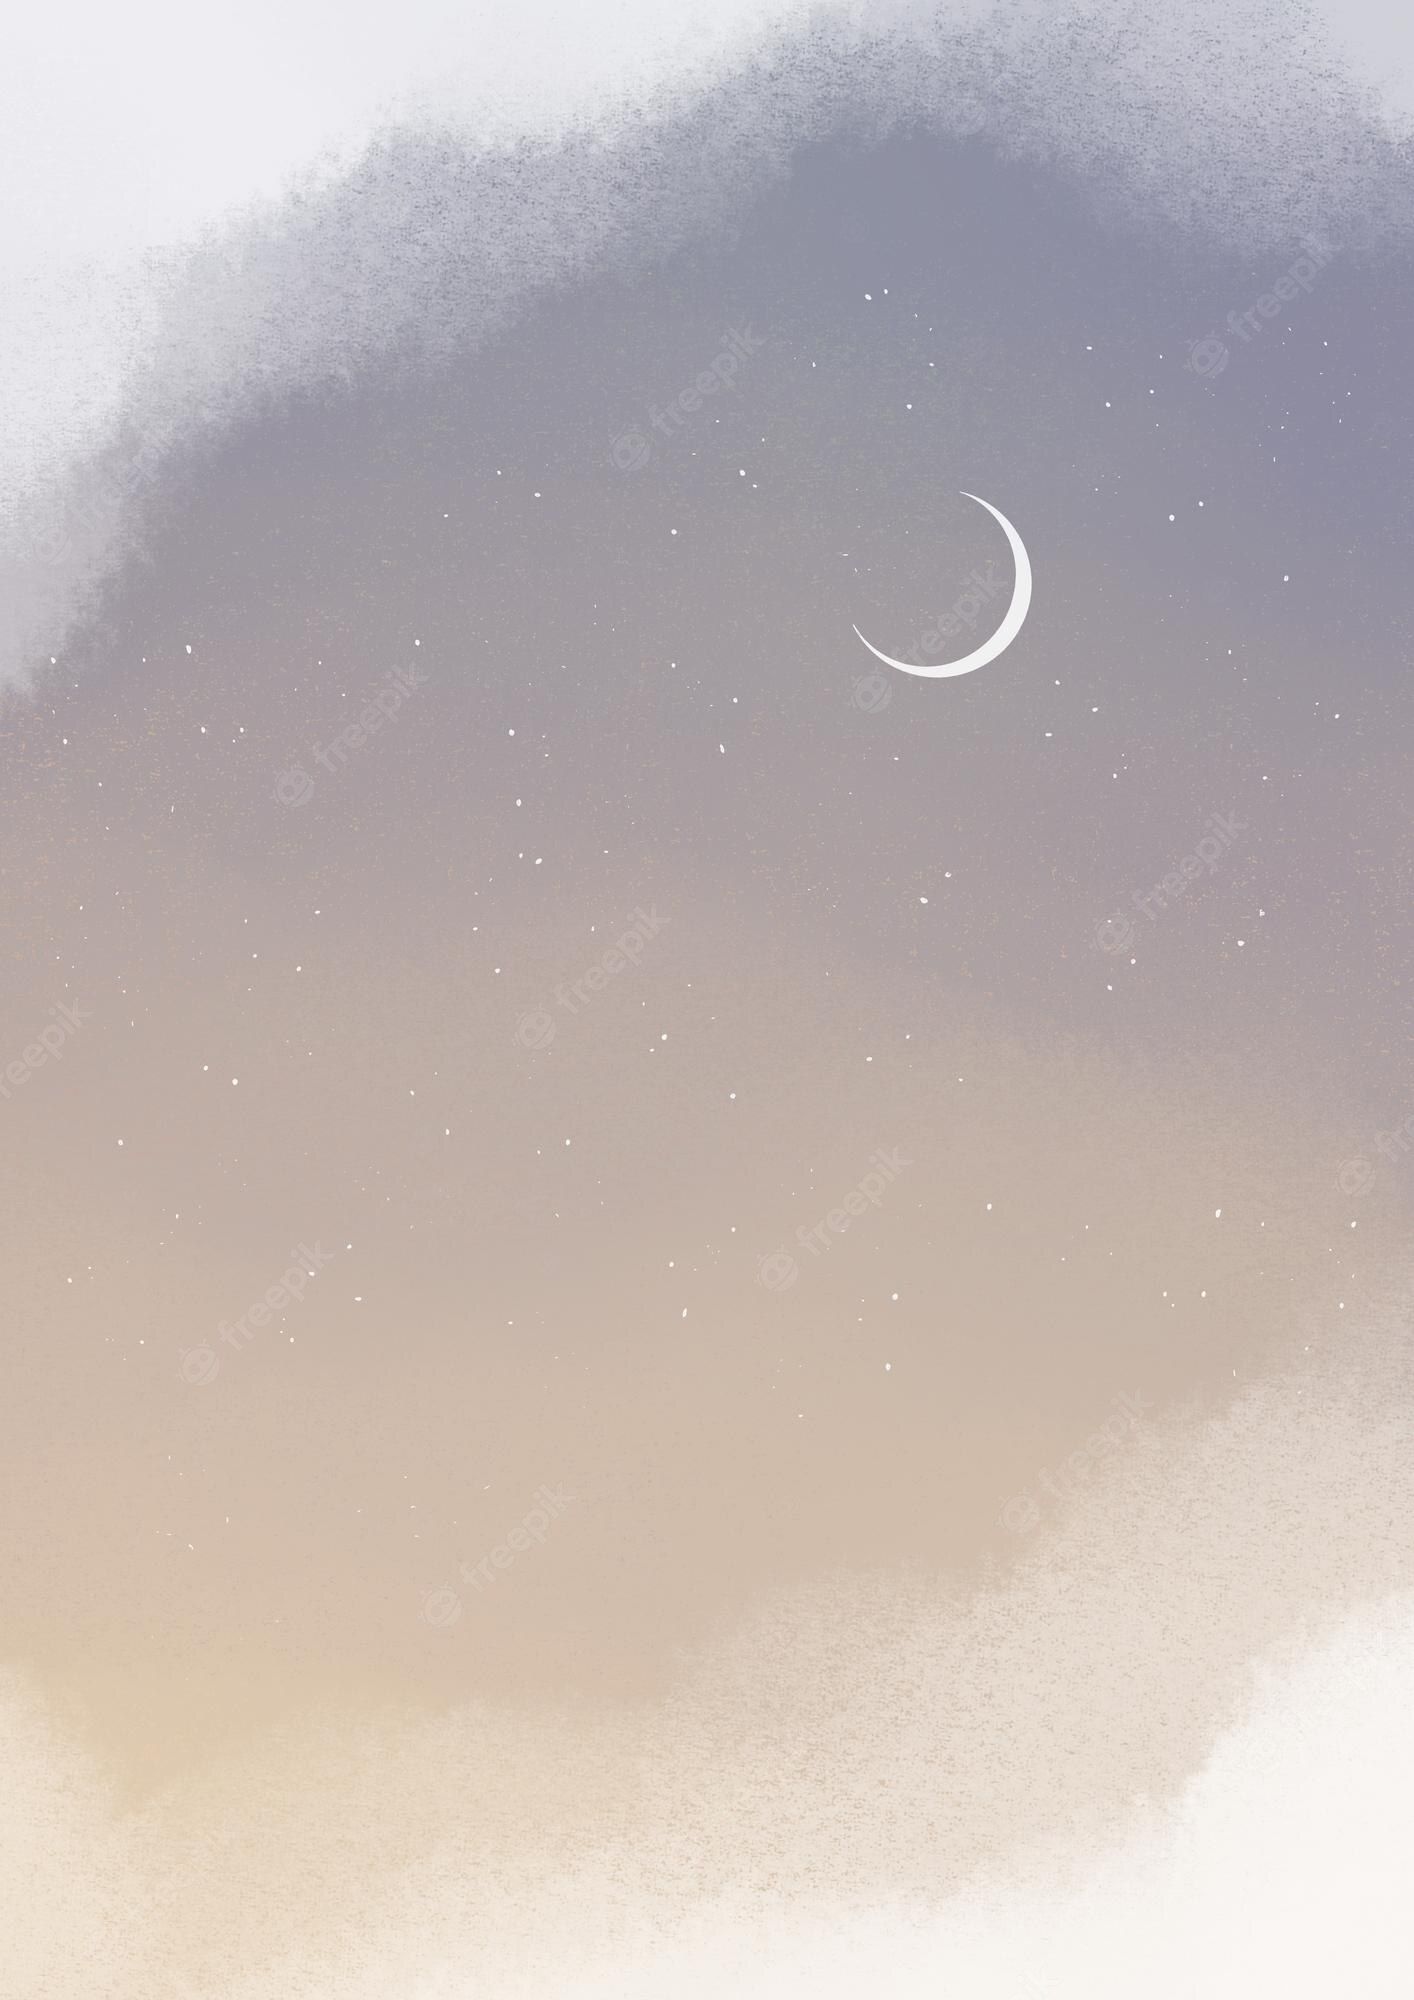 A watercolor style image of a crescent moon - Moon phases, moon